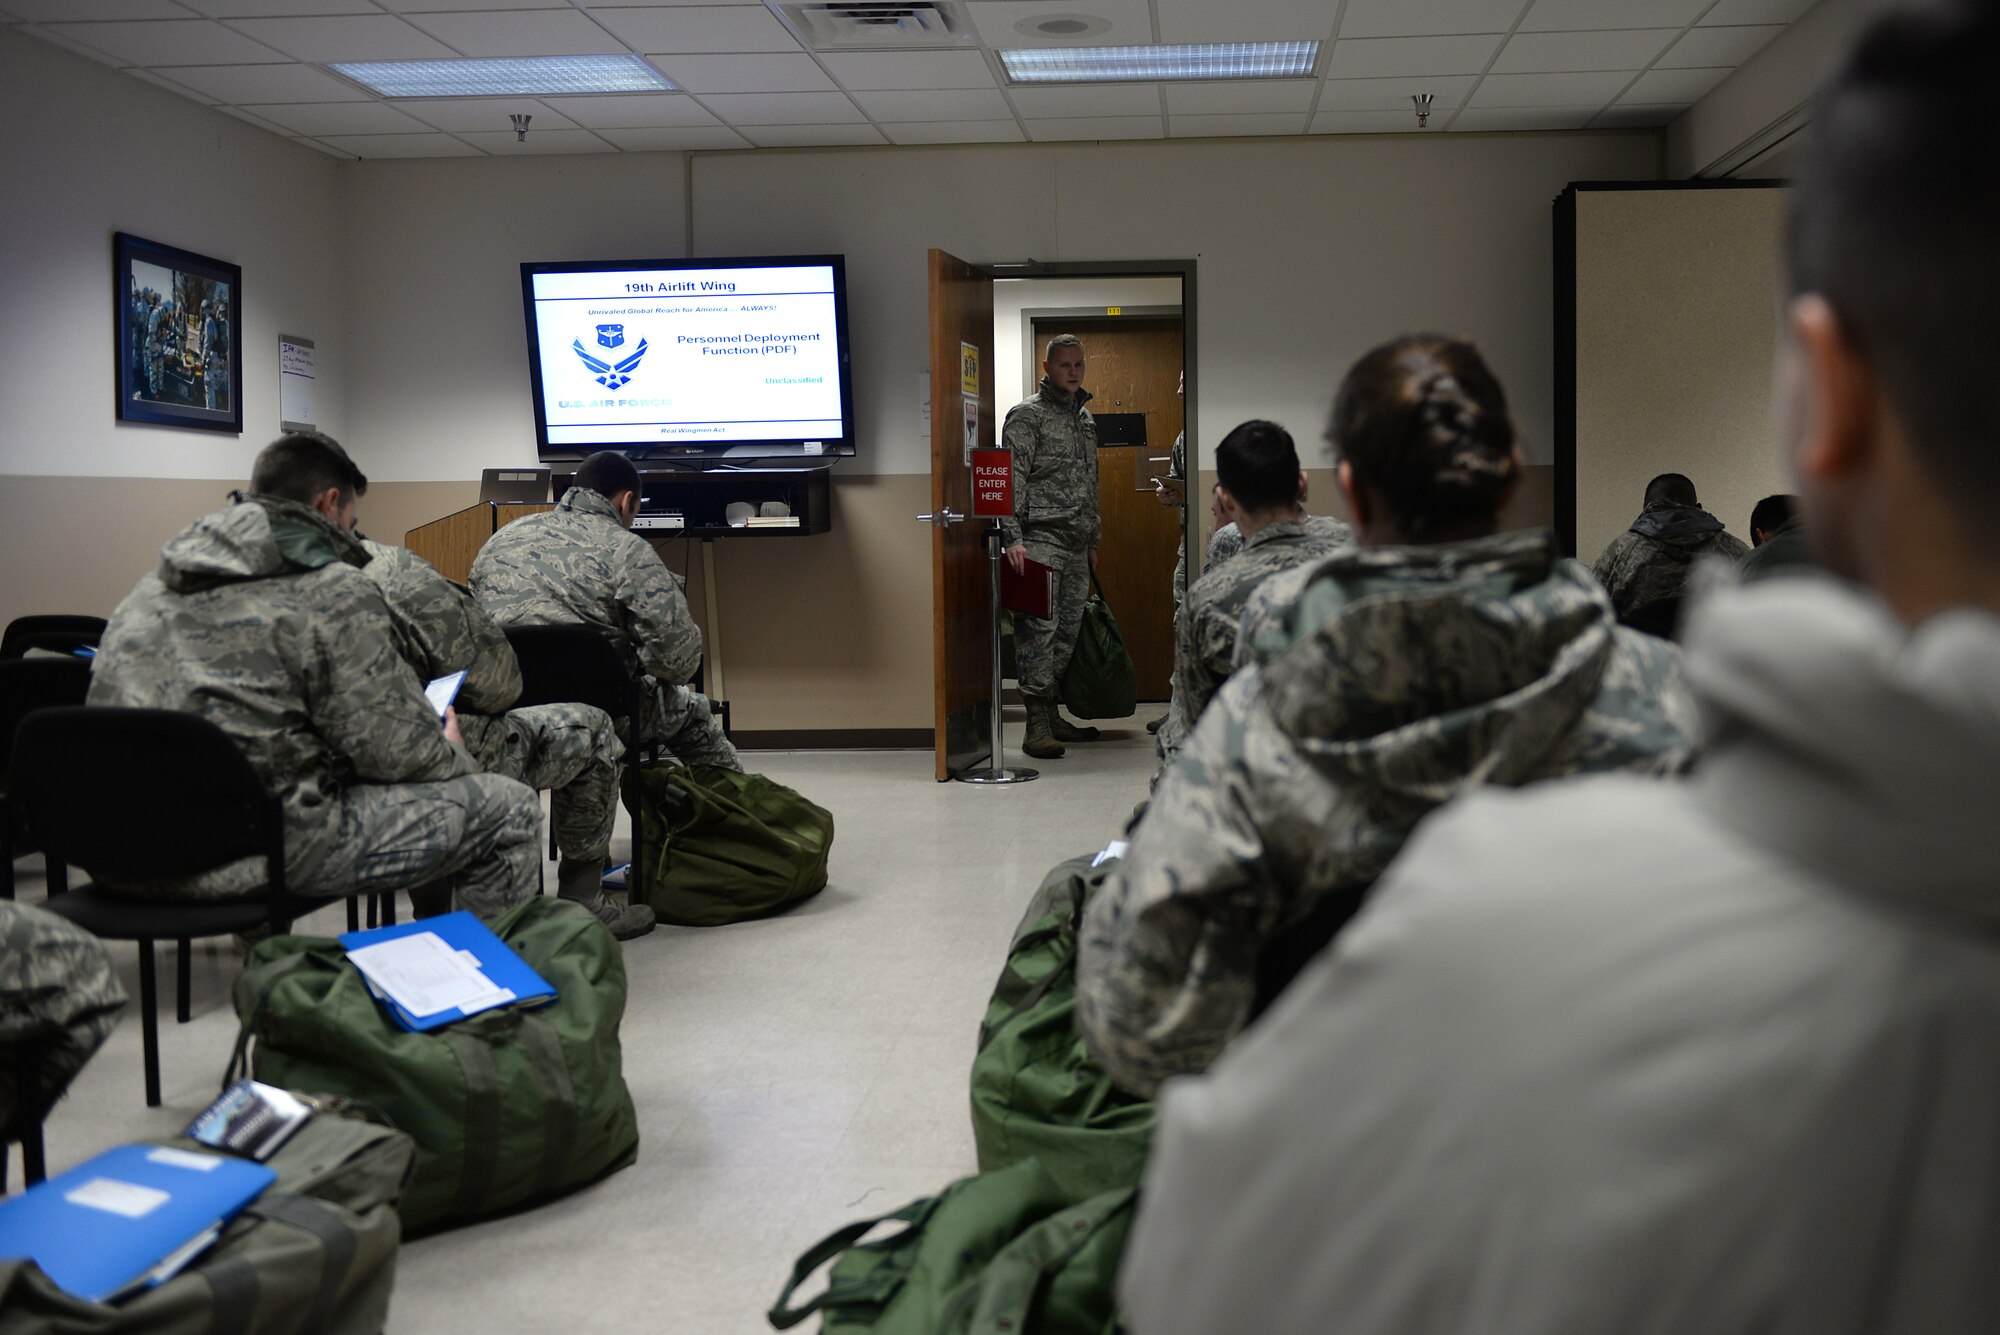 Airmen sit in a room with deployment bags on the ground next to them watching a screen.